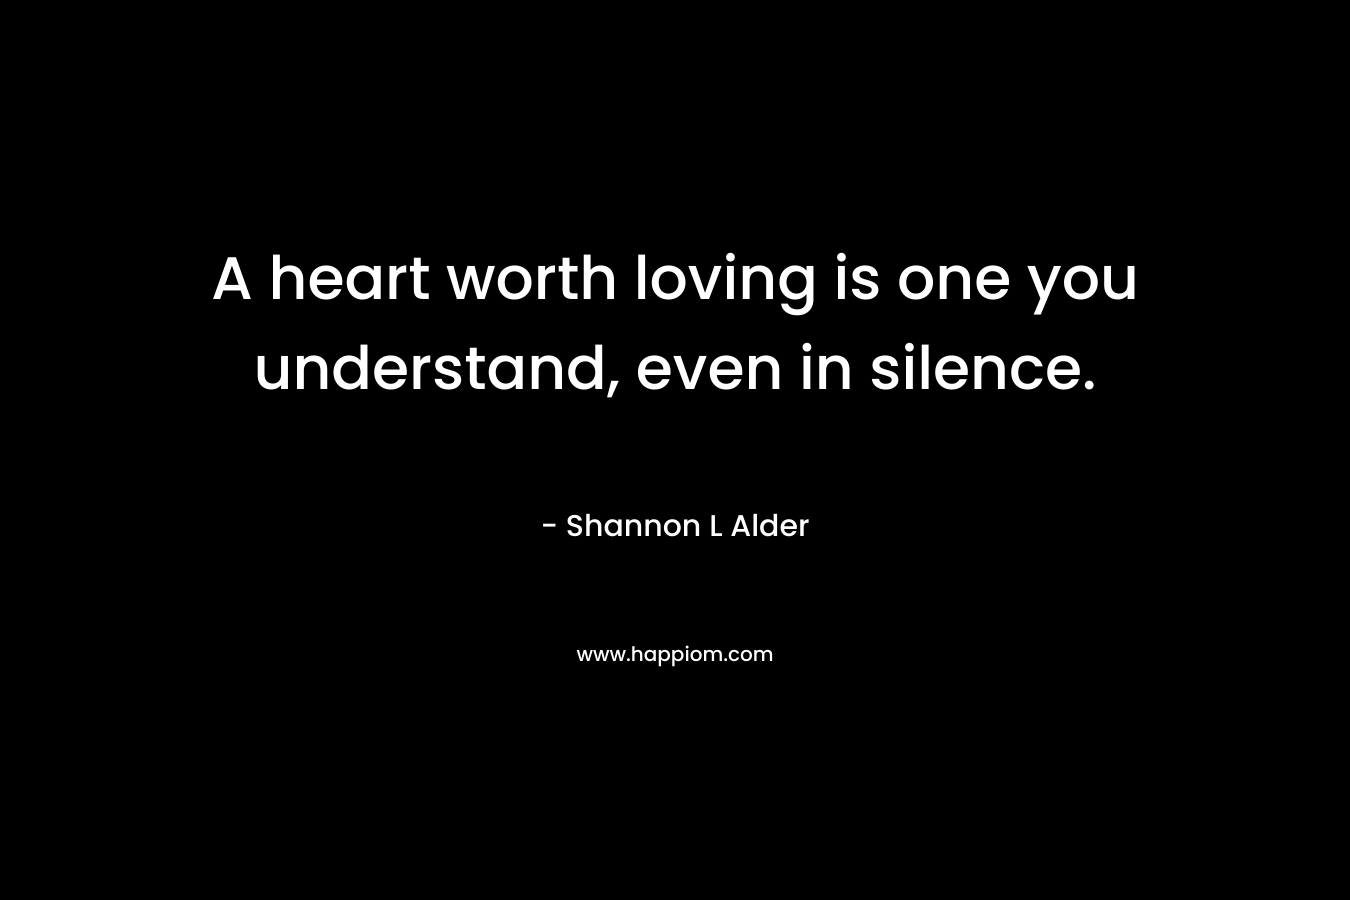 A heart worth loving is one you understand, even in silence.